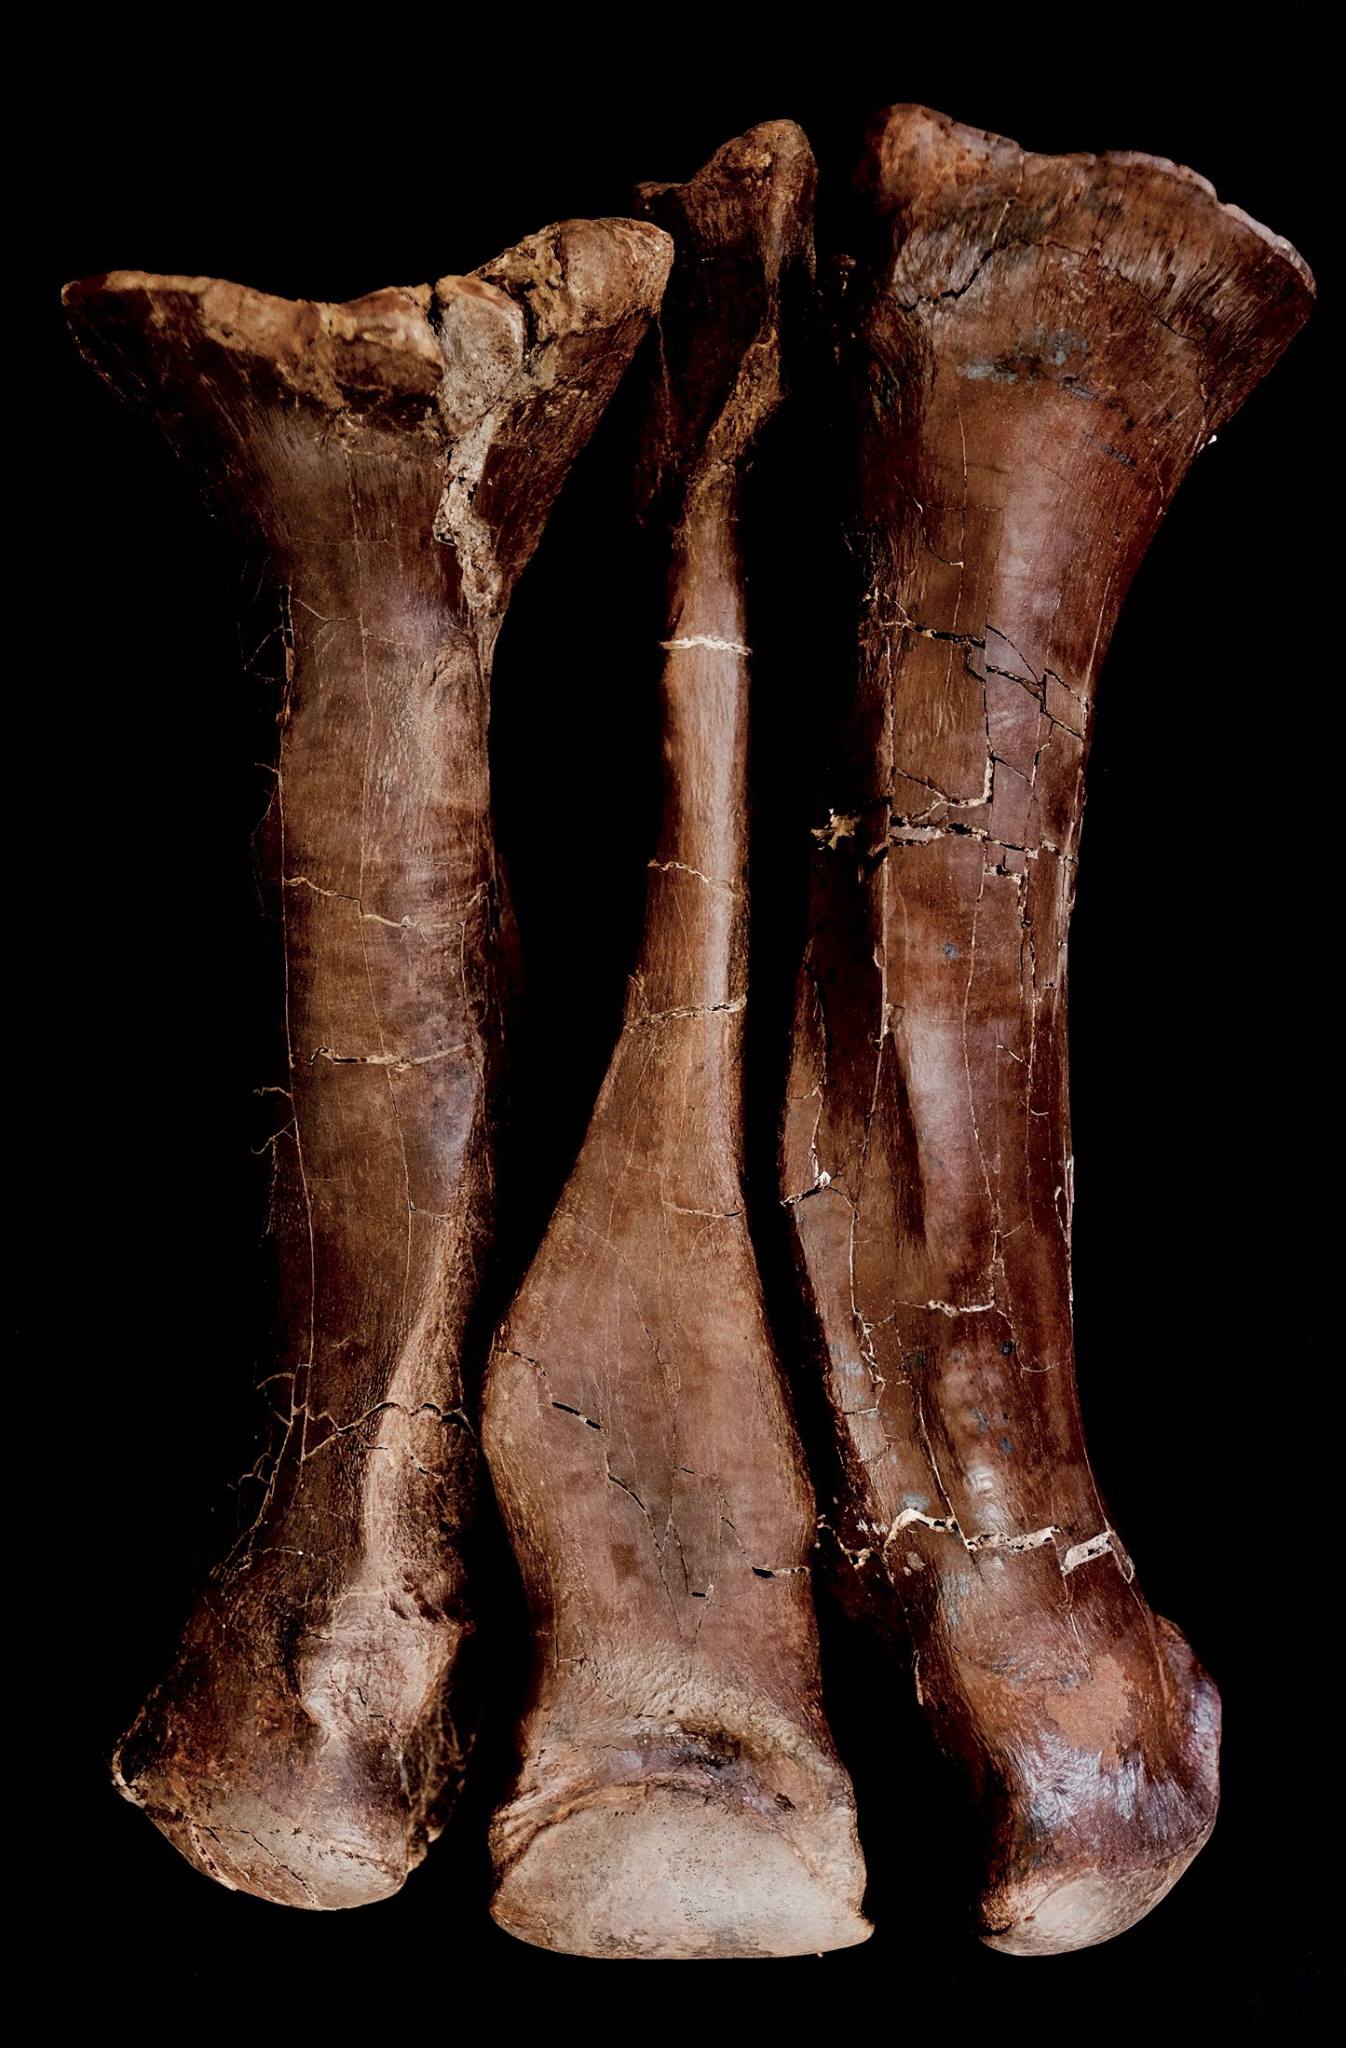 Tyrannosaurus rex - metatarsals  These are the three metatarsals from Victoria’s left leg. There is evidence that she may have suffered a tendon avulsion, which would have made walking or running very painful.    (approx. 65 million years old)